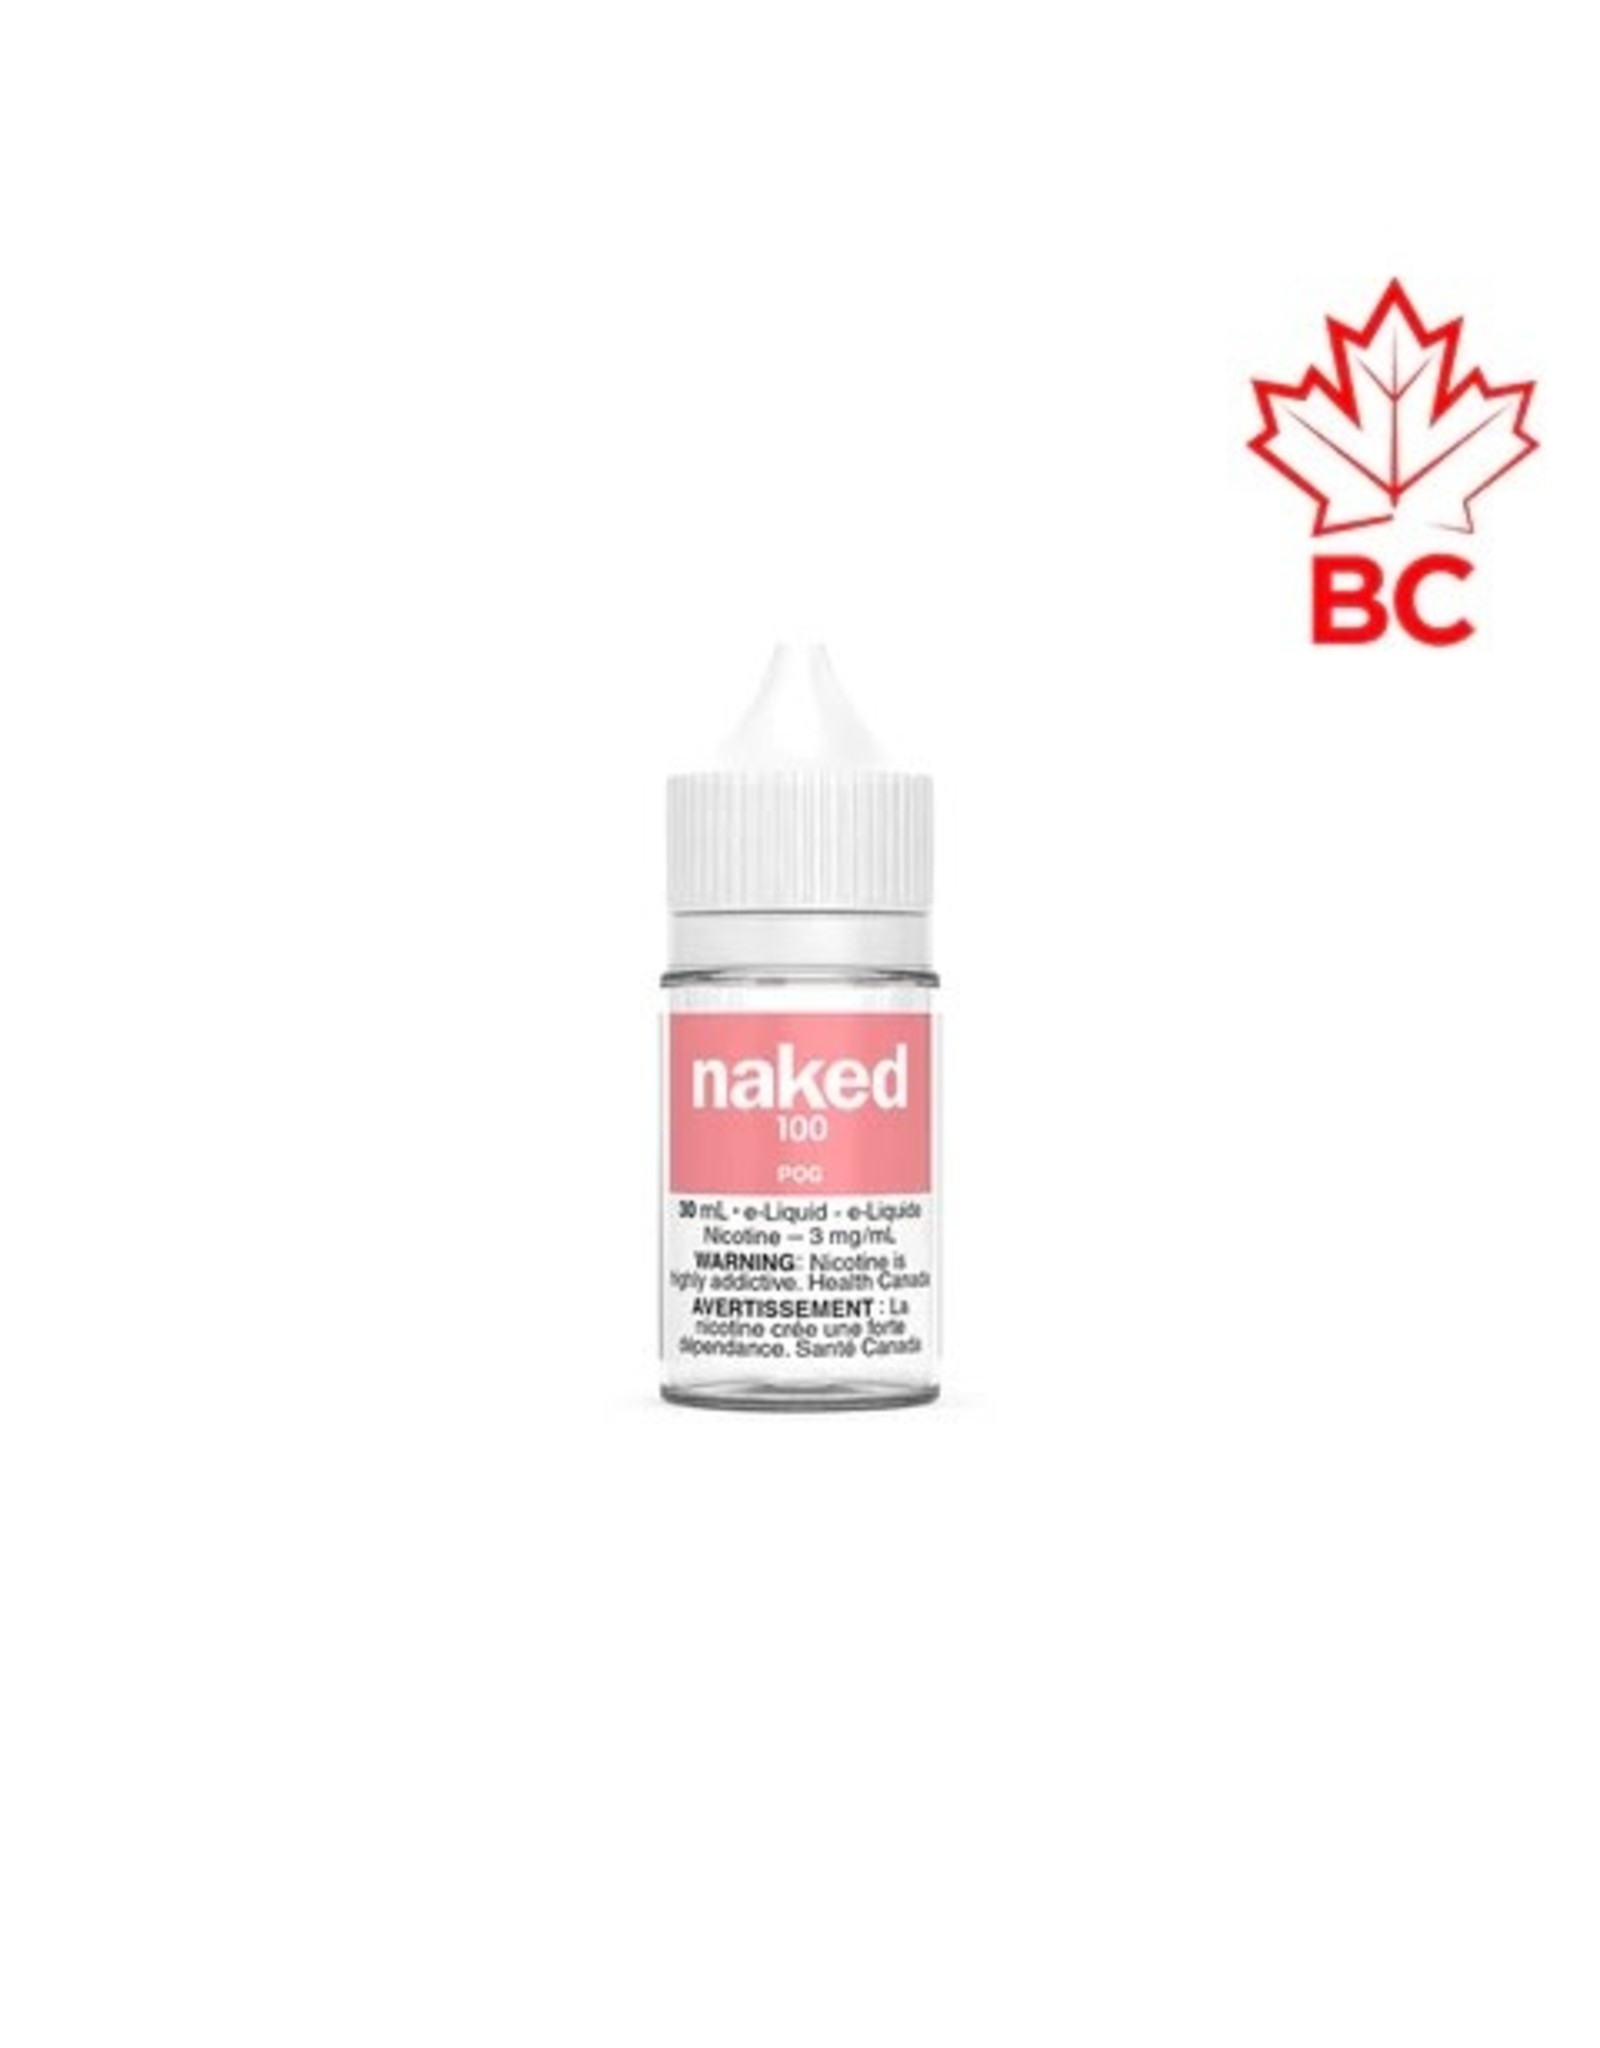 NAKED100 POG BY NAKED100 (30ml/6mg)